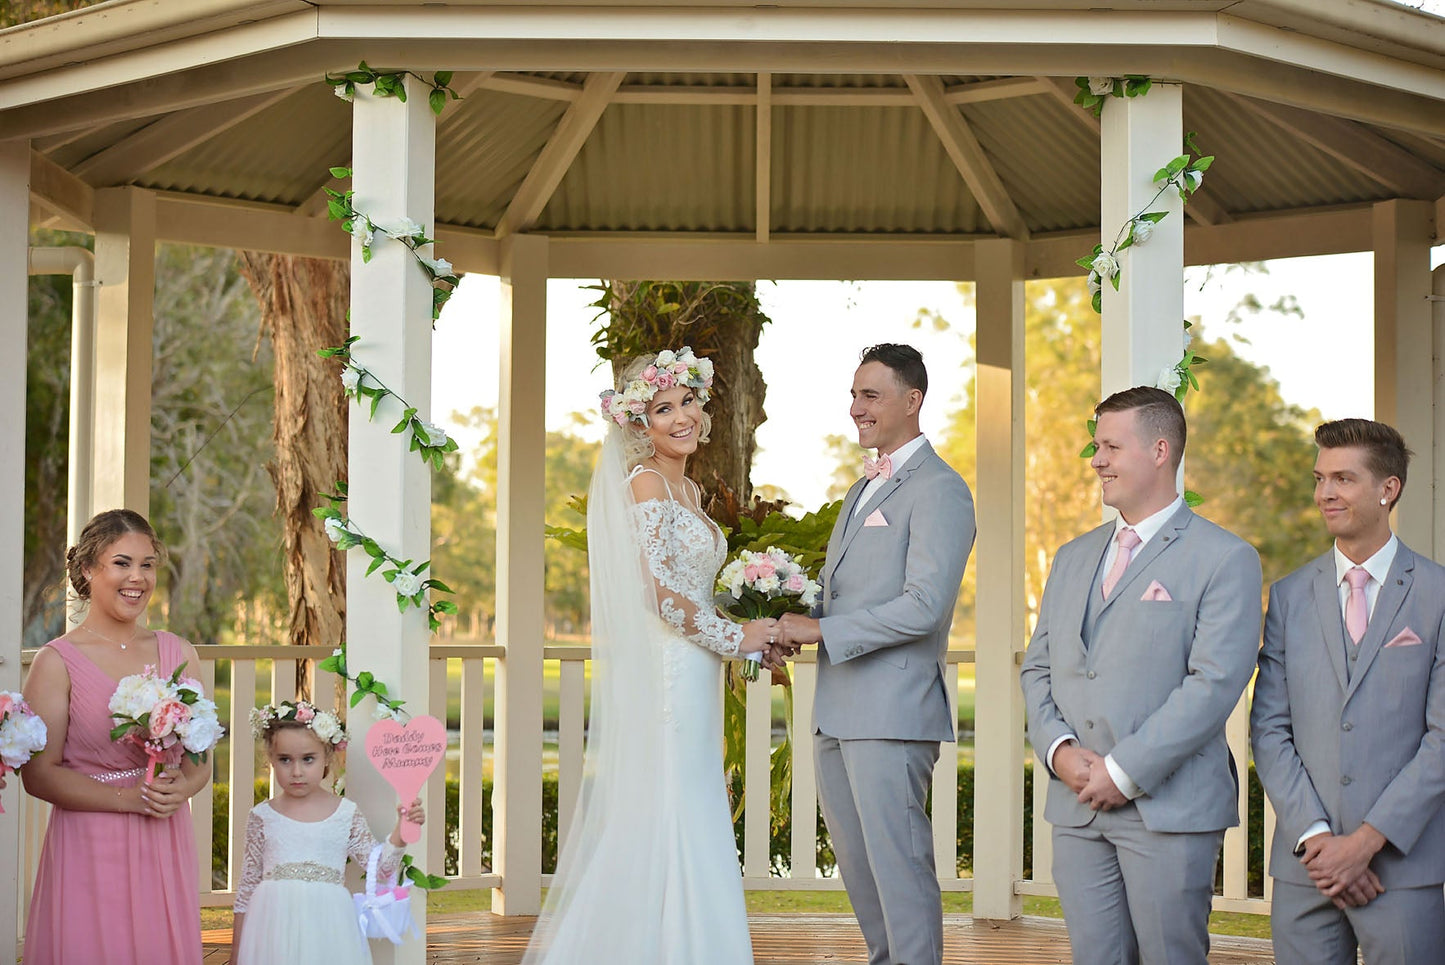 Golf Club Garden Ceremony - Any day of the week